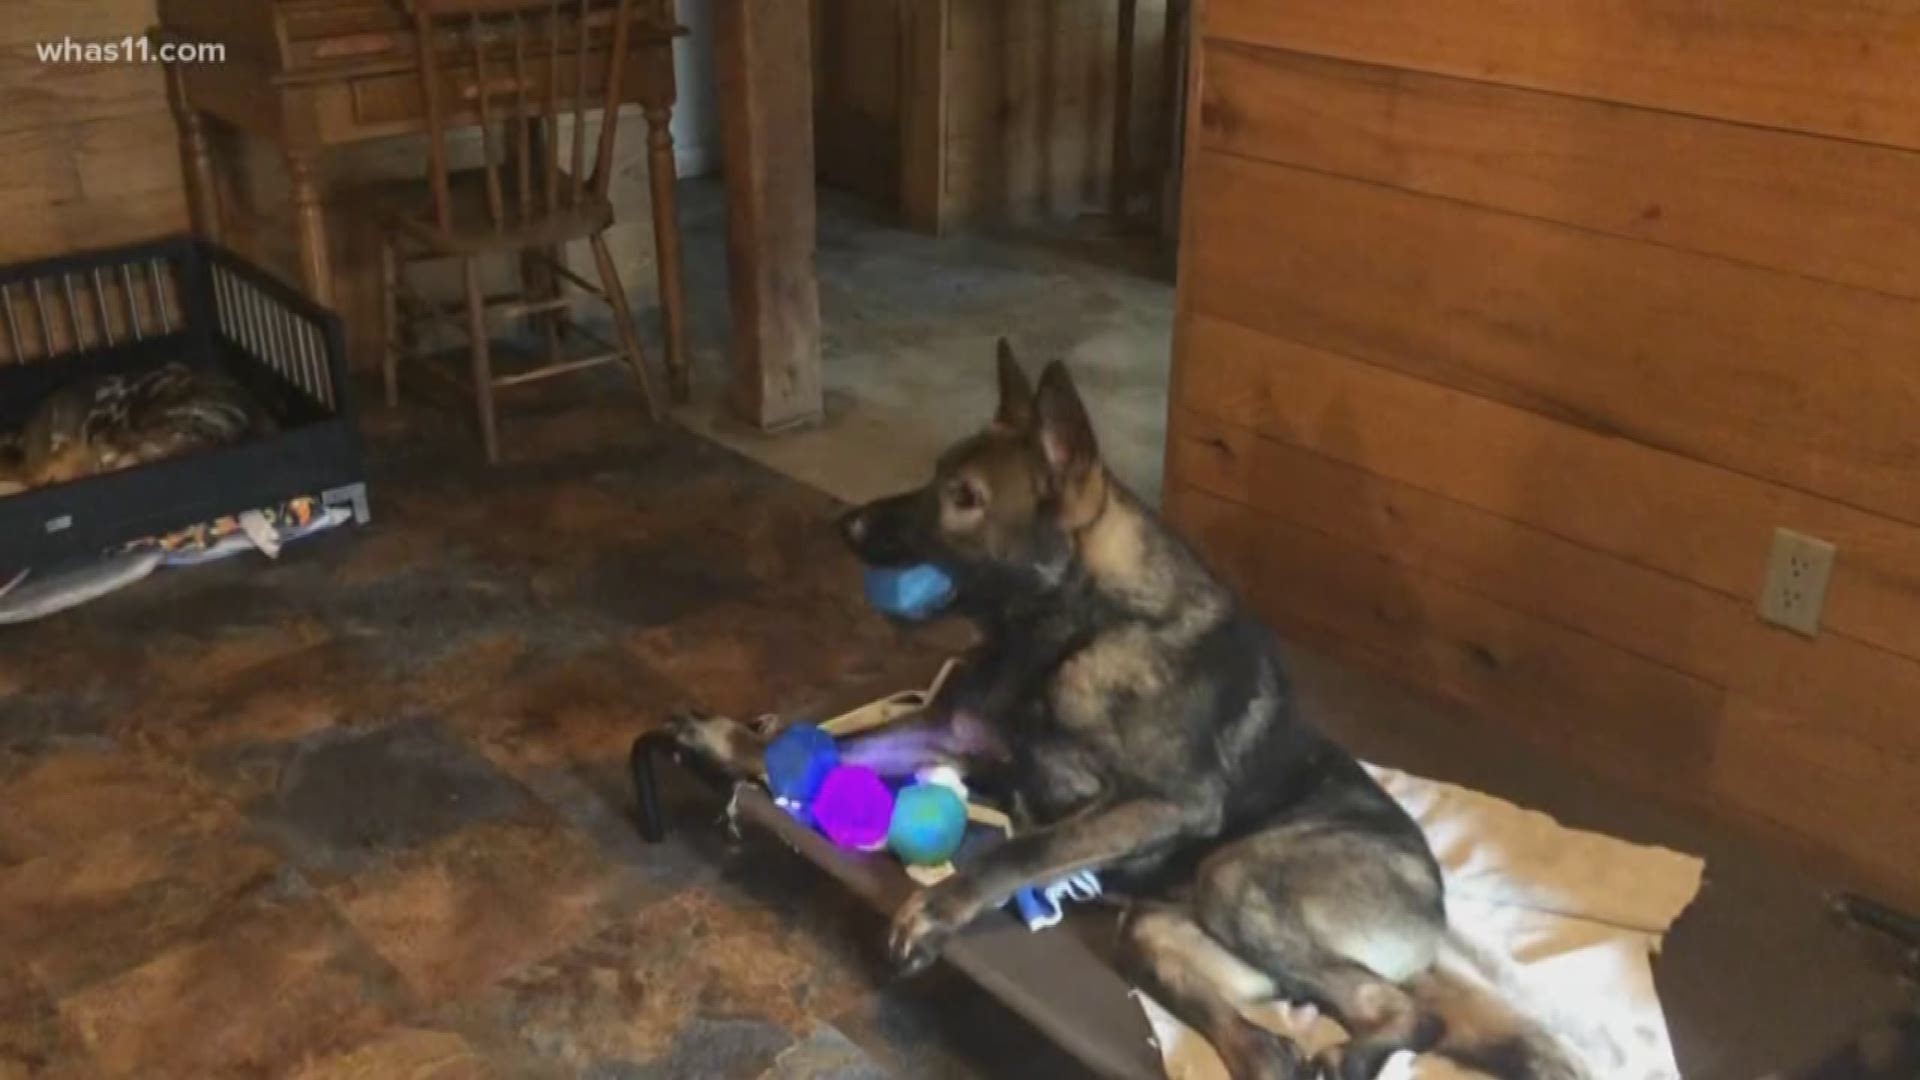 Phoenix the German Shepherd is determined to live his best life - and thanks to his foster family, he's getting the chance to.